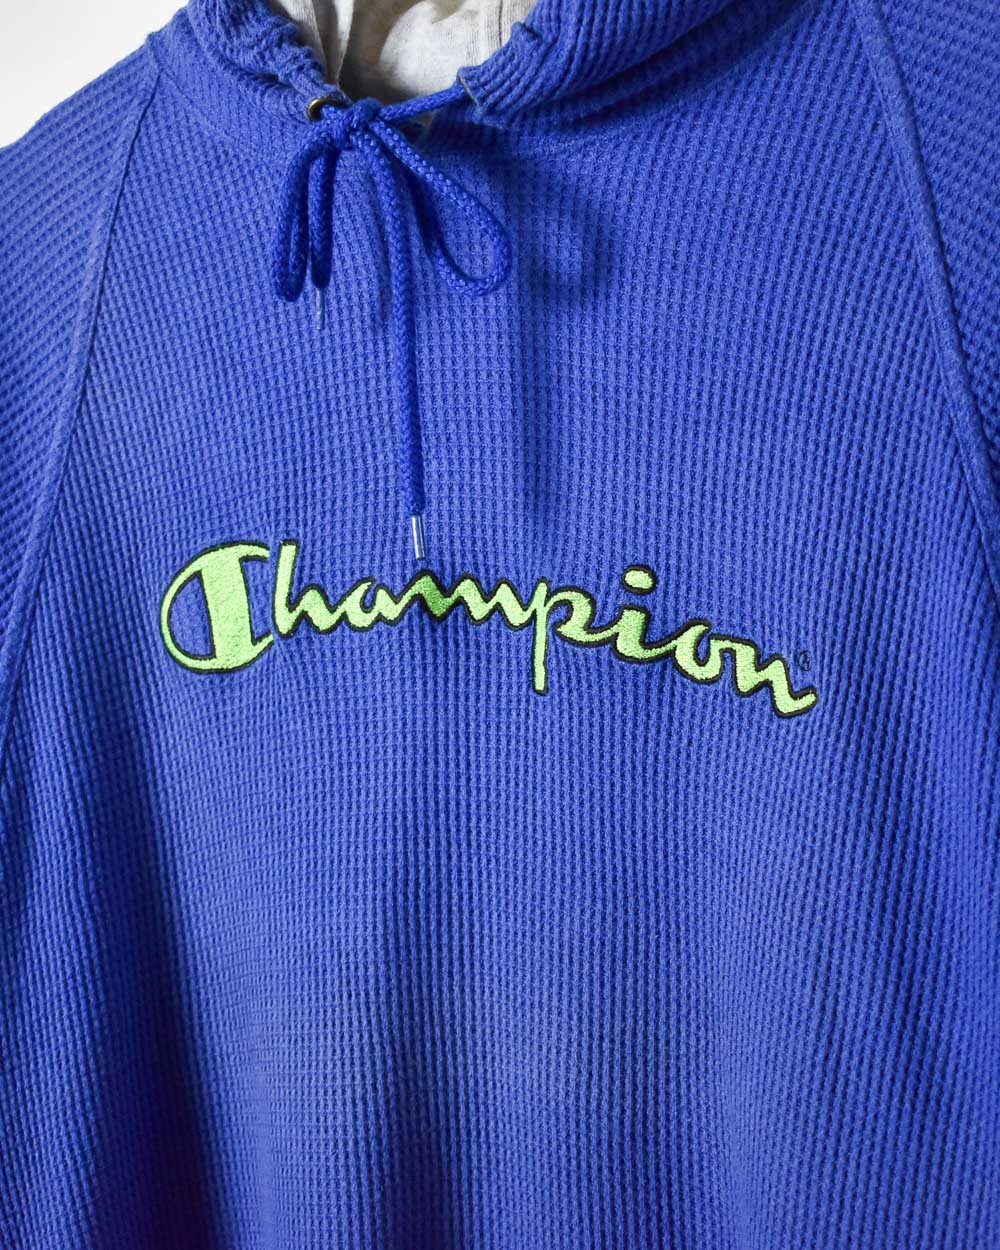 Blue Champion Textured Hoodie - Small